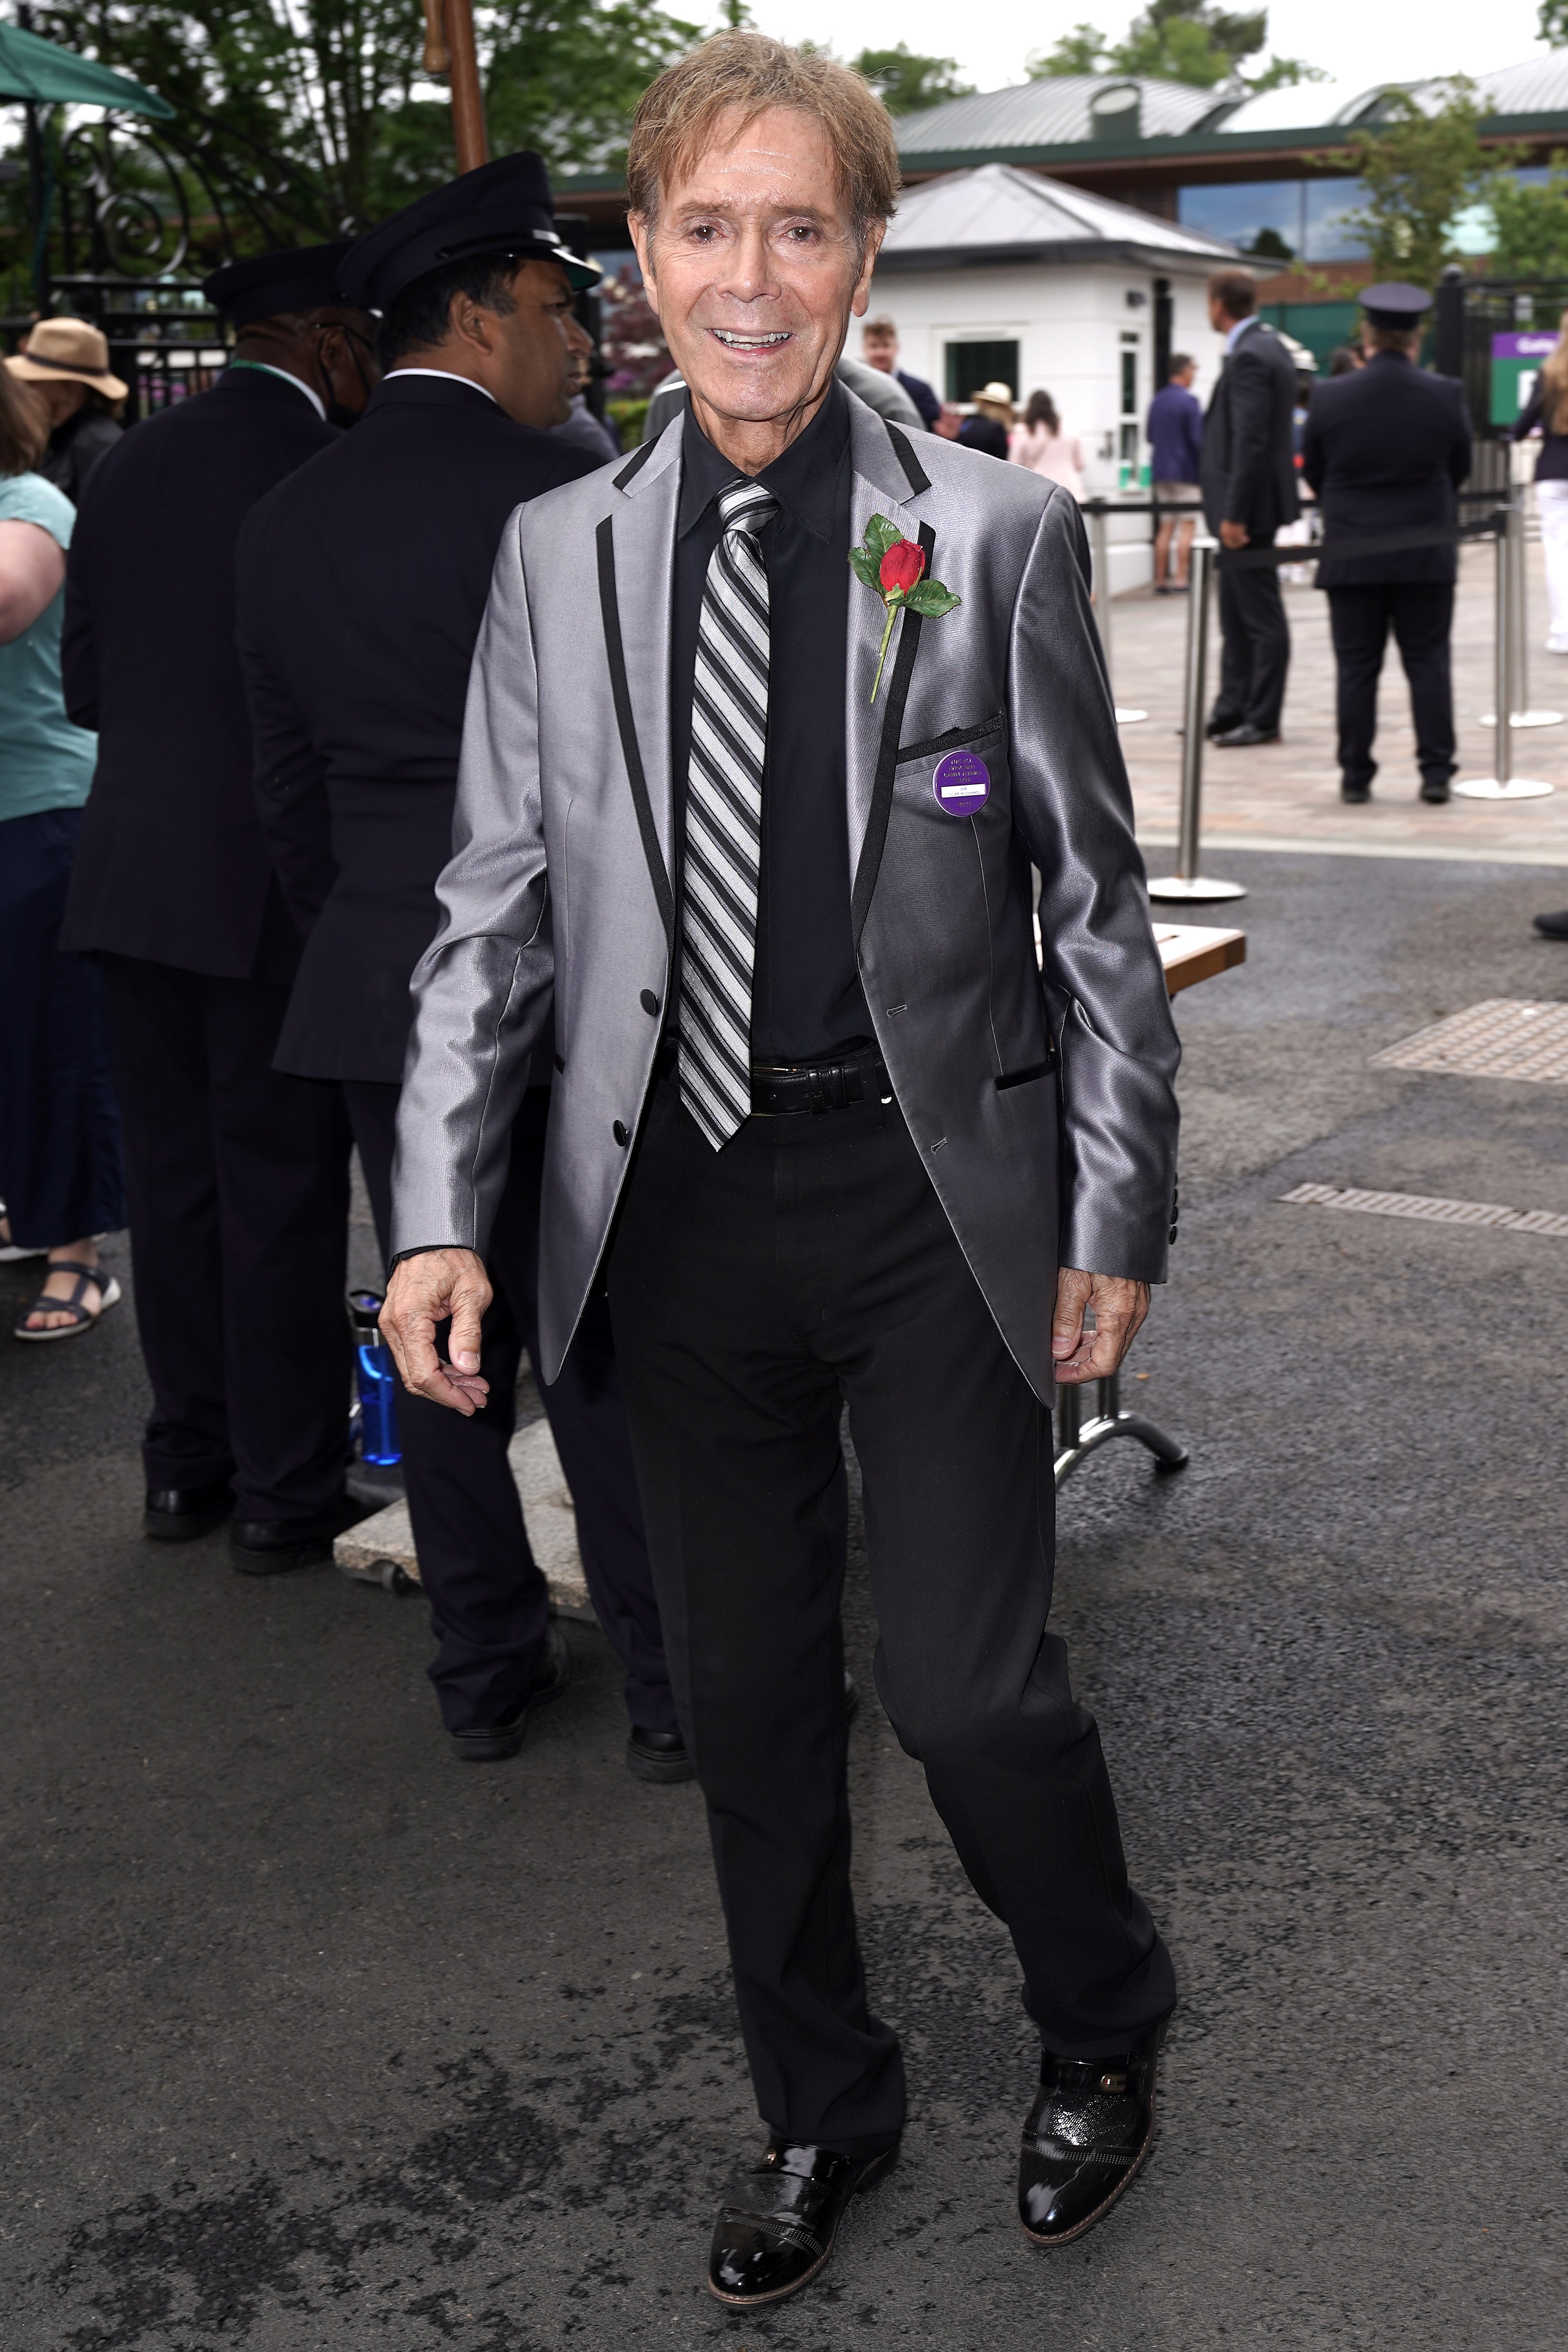 Sir Cliff Richard arrives during day one of the 2022 Wimbledon Championships (Aaron Chown/PA)